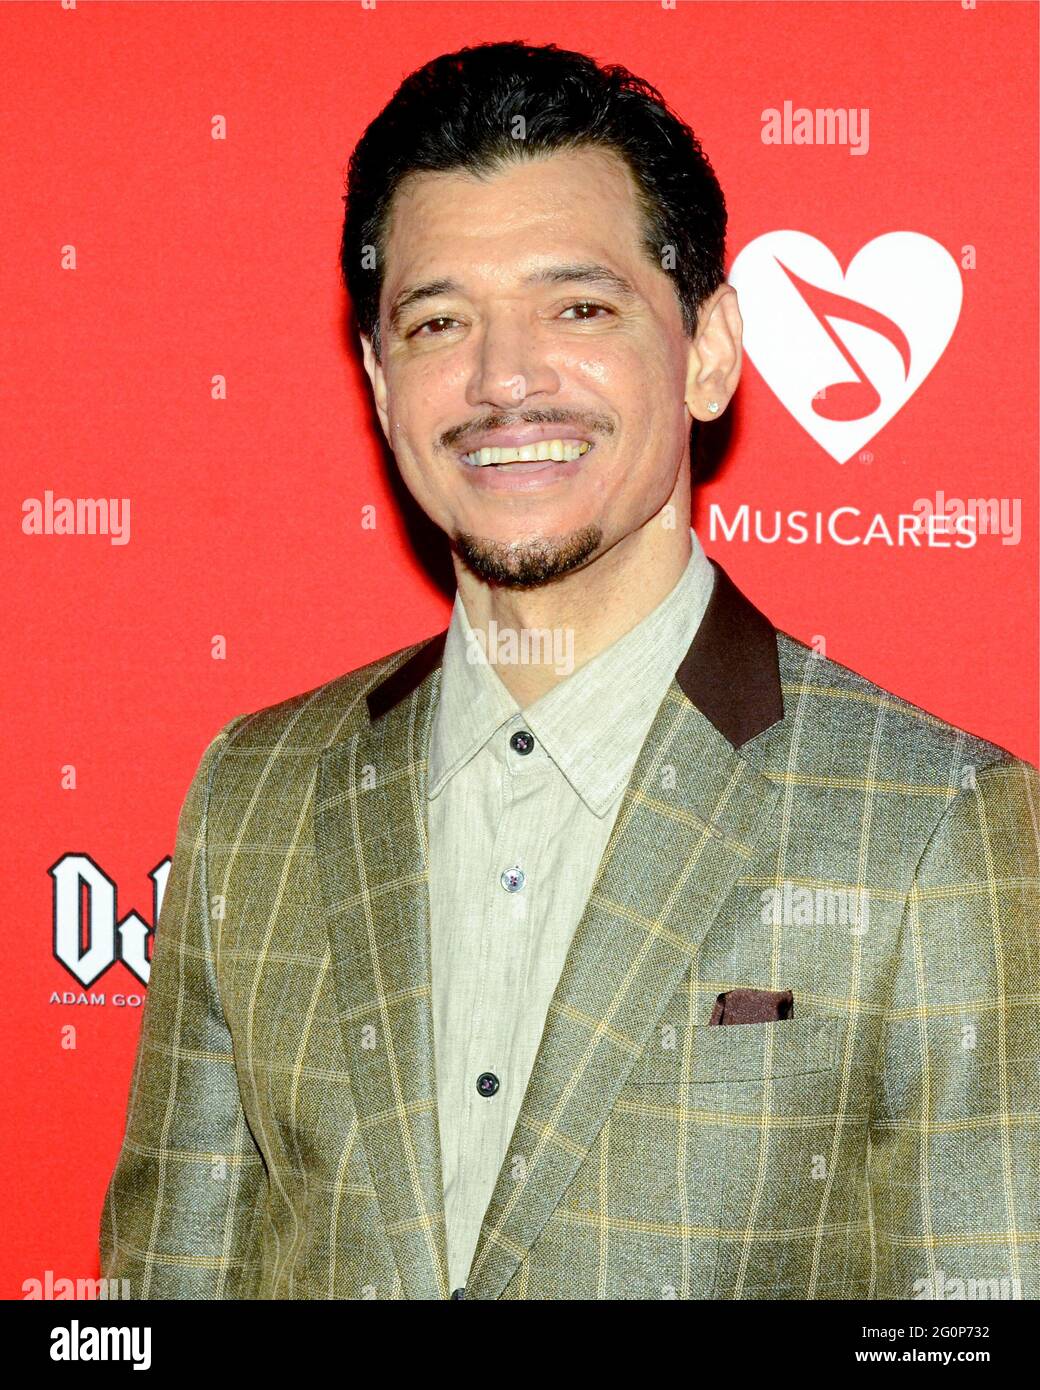 May 19, 2016, Los Angeles, California, USA: El DeBarge attends the 12th Annual MusiCares MAP Fund Tribute Concert. (Credit Image: © Billy Bennight/ZUMA Wire) Stock Photo